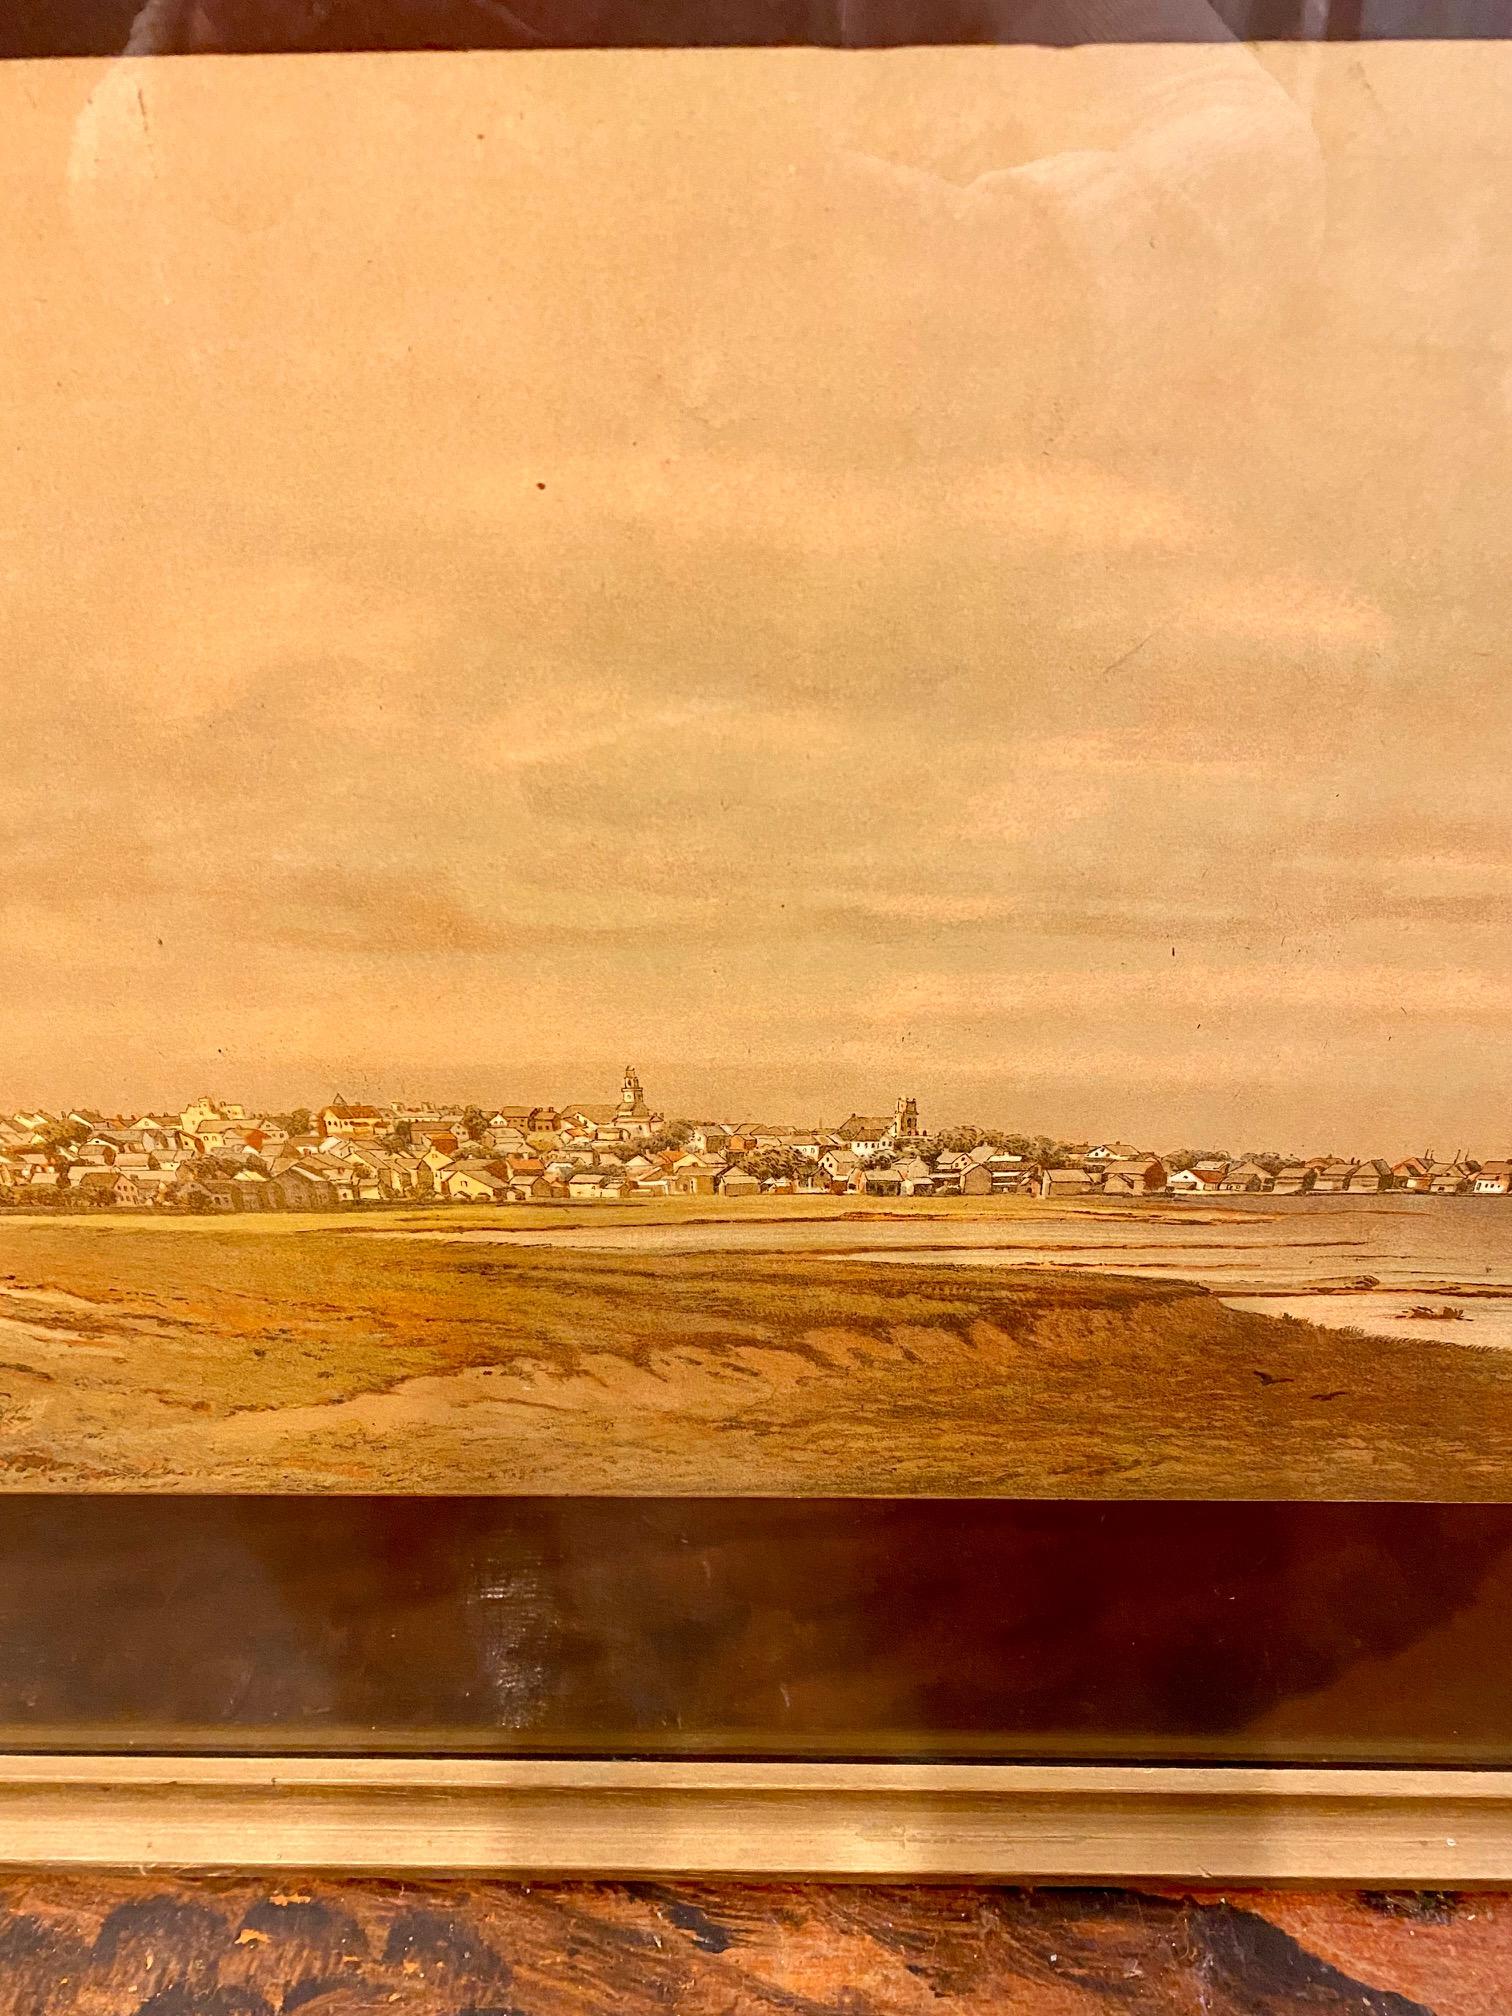 Wendell Macy Chromolithograph of Nantucket Town and Harbor, circa 1881, a colored stone lithograph of Nantucket town with Brant point jutting out into the harbor, the Creeks marsh and dunes in the foreground, as seen from the vantage of Monomoy